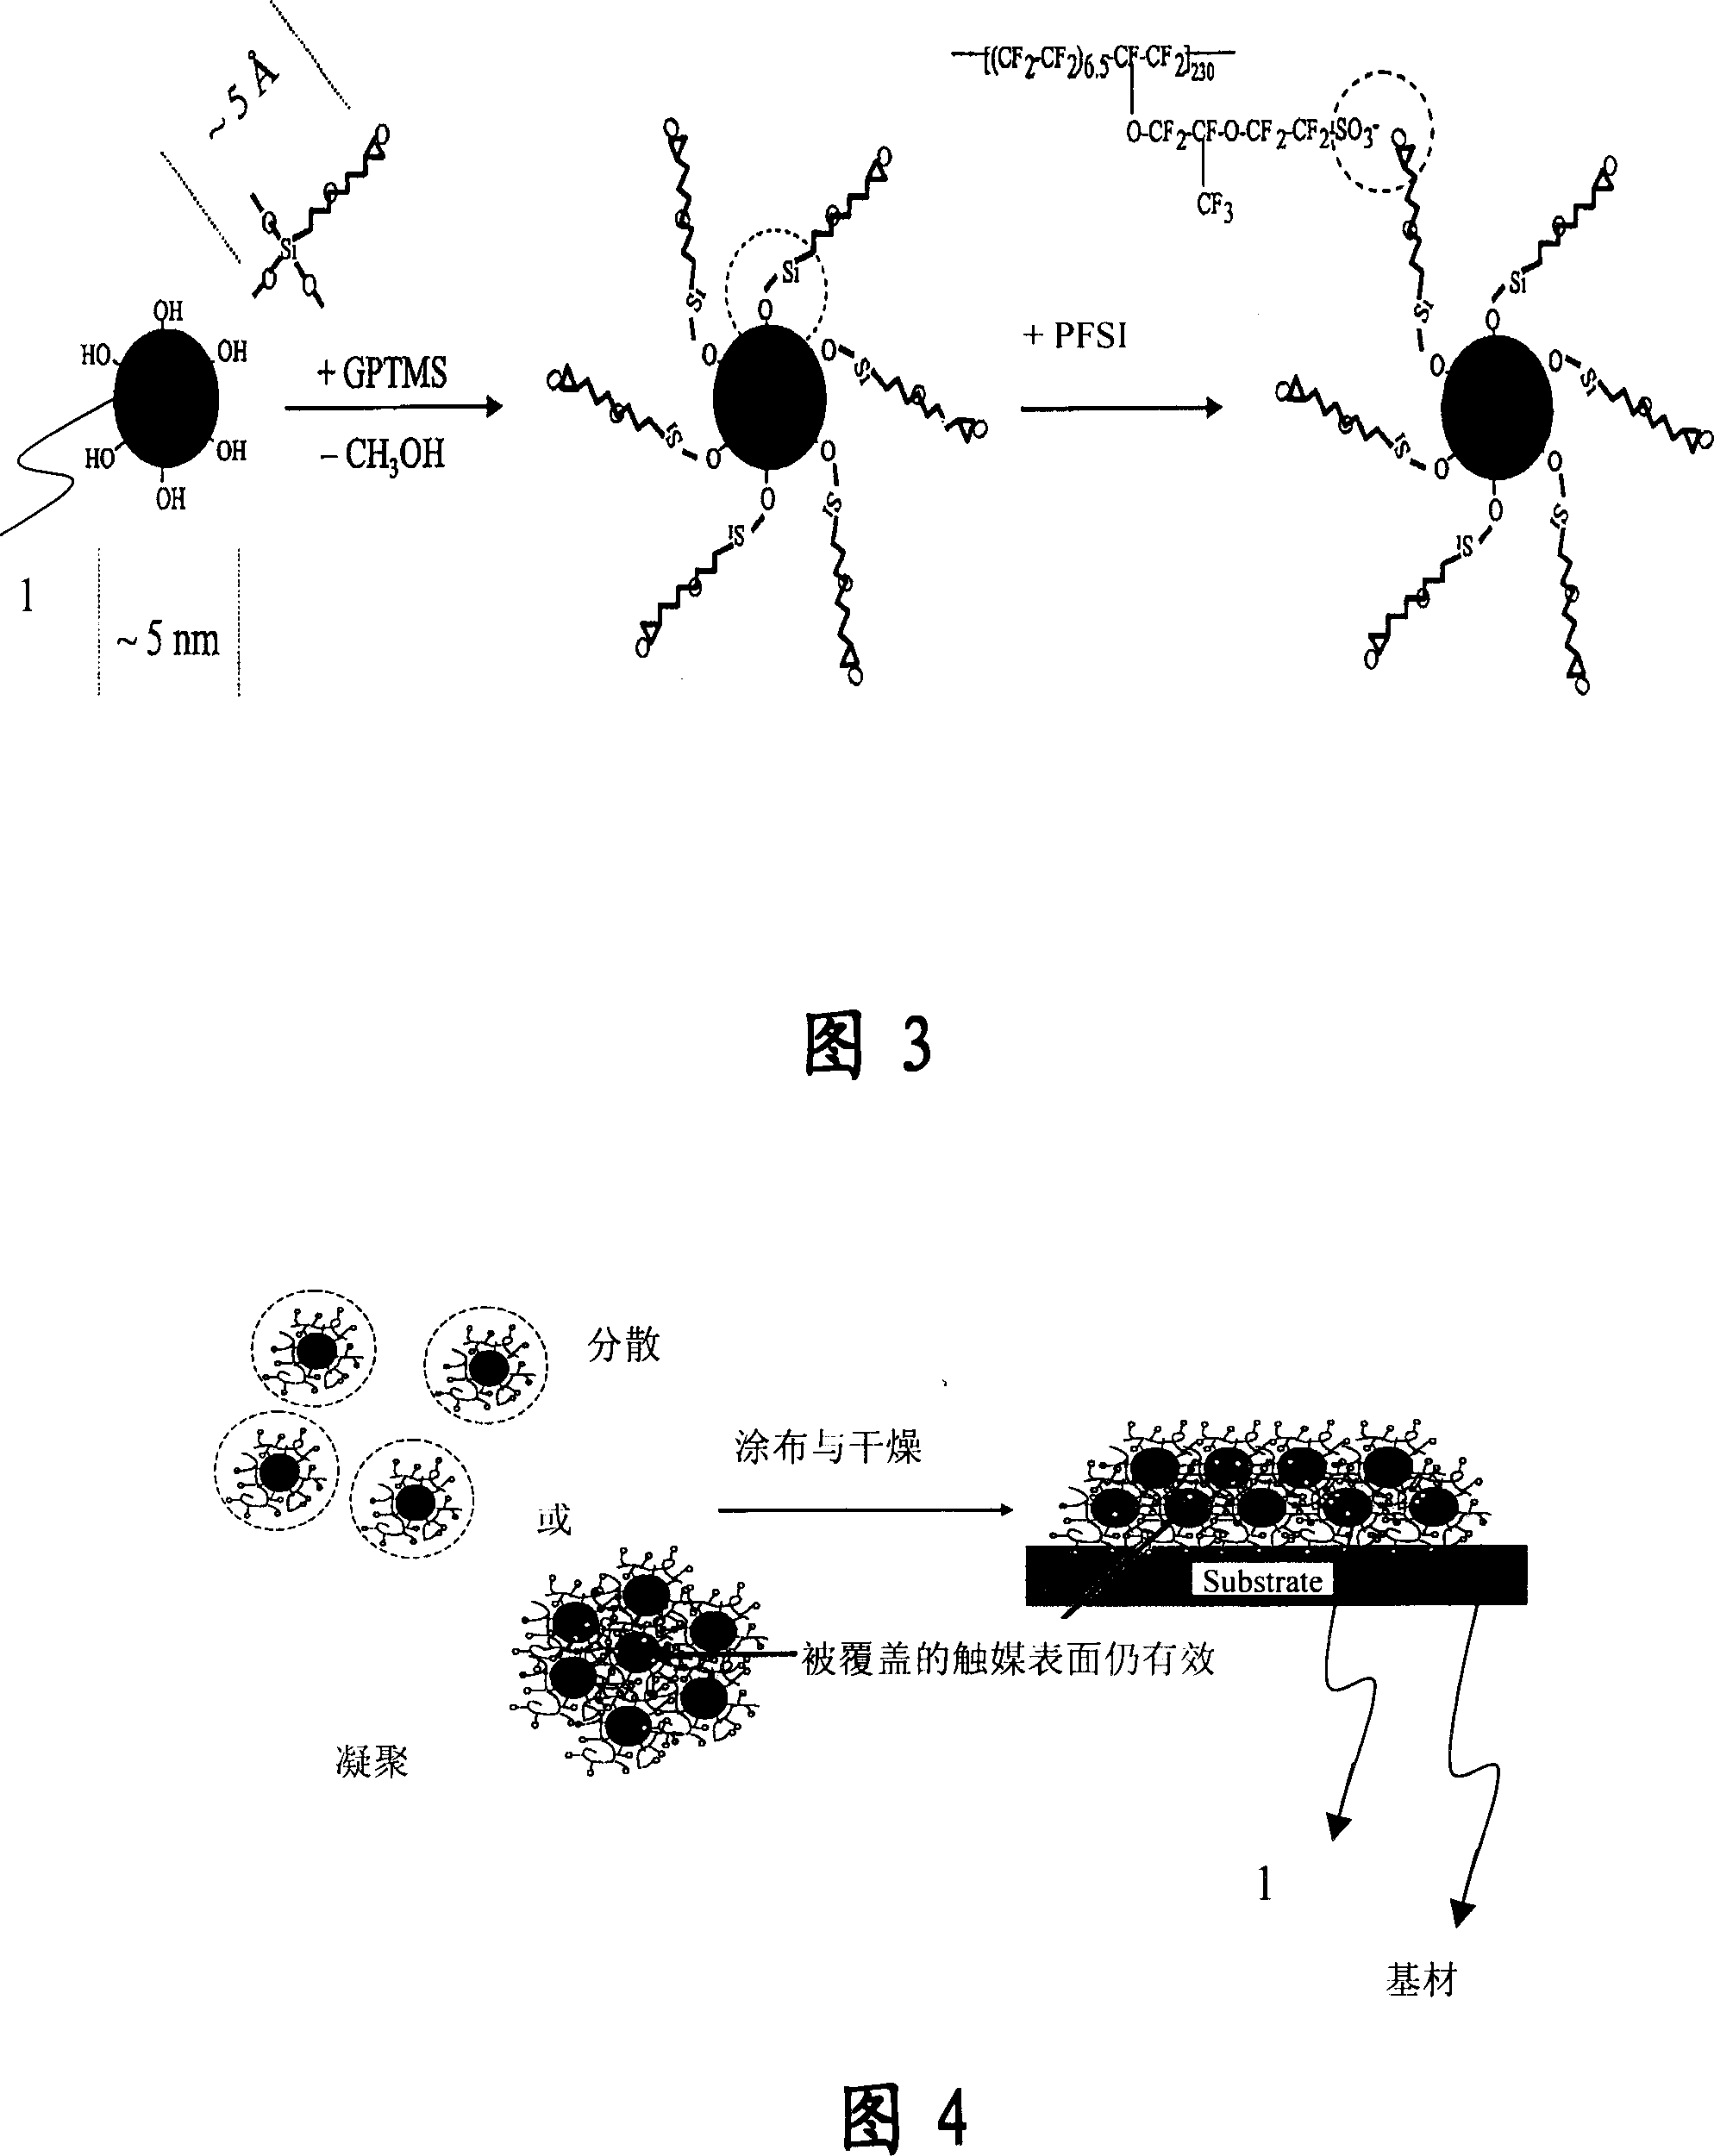 Composition, compound body, and method for raising utilization ratio of catalyst